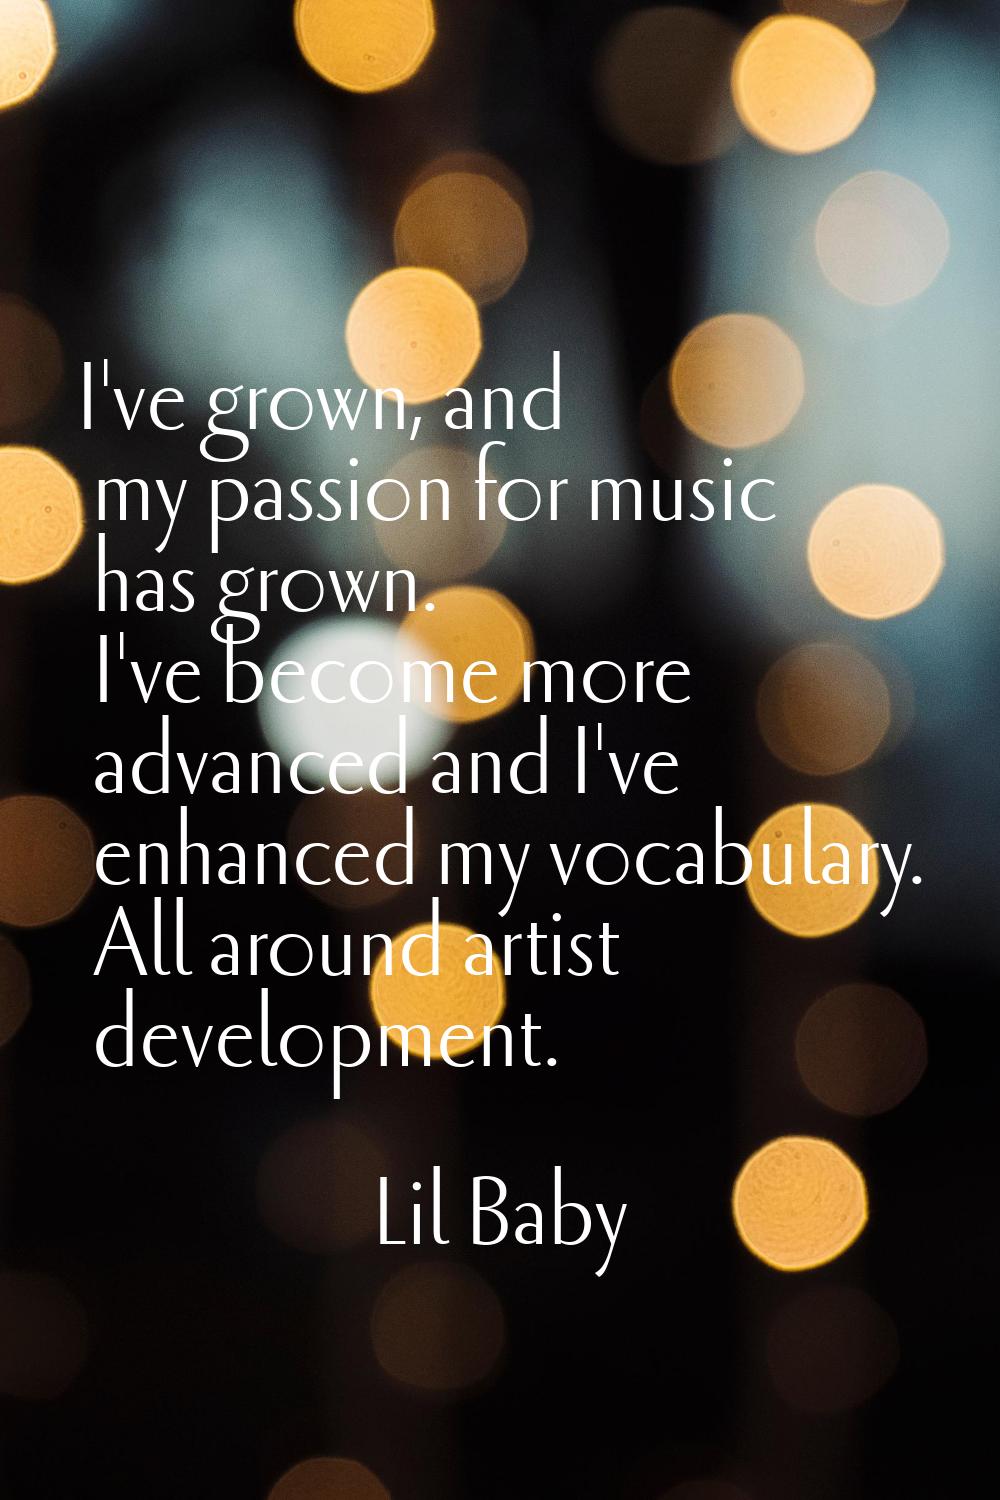 I've grown, and my passion for music has grown. I've become more advanced and I've enhanced my voca